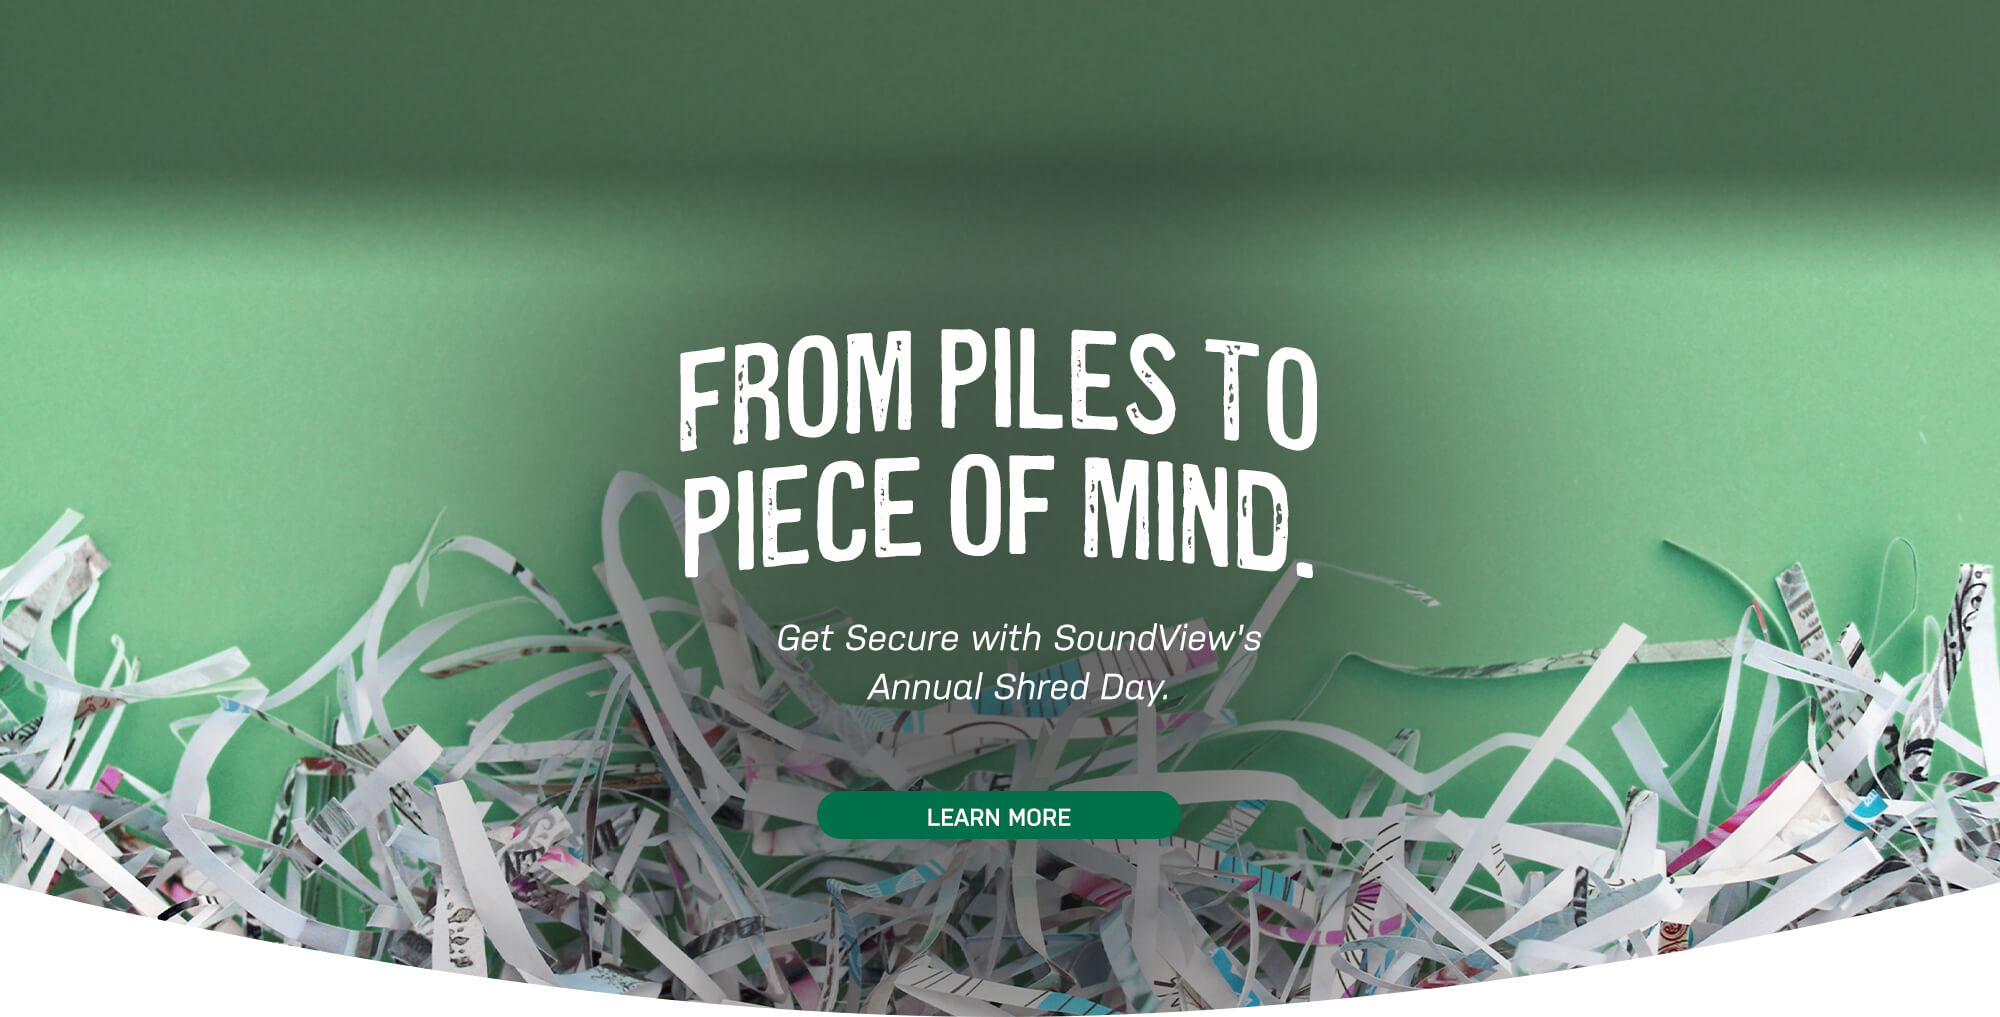 From piles to piece of mind. Get secure with soundview's annual shred day. learn more